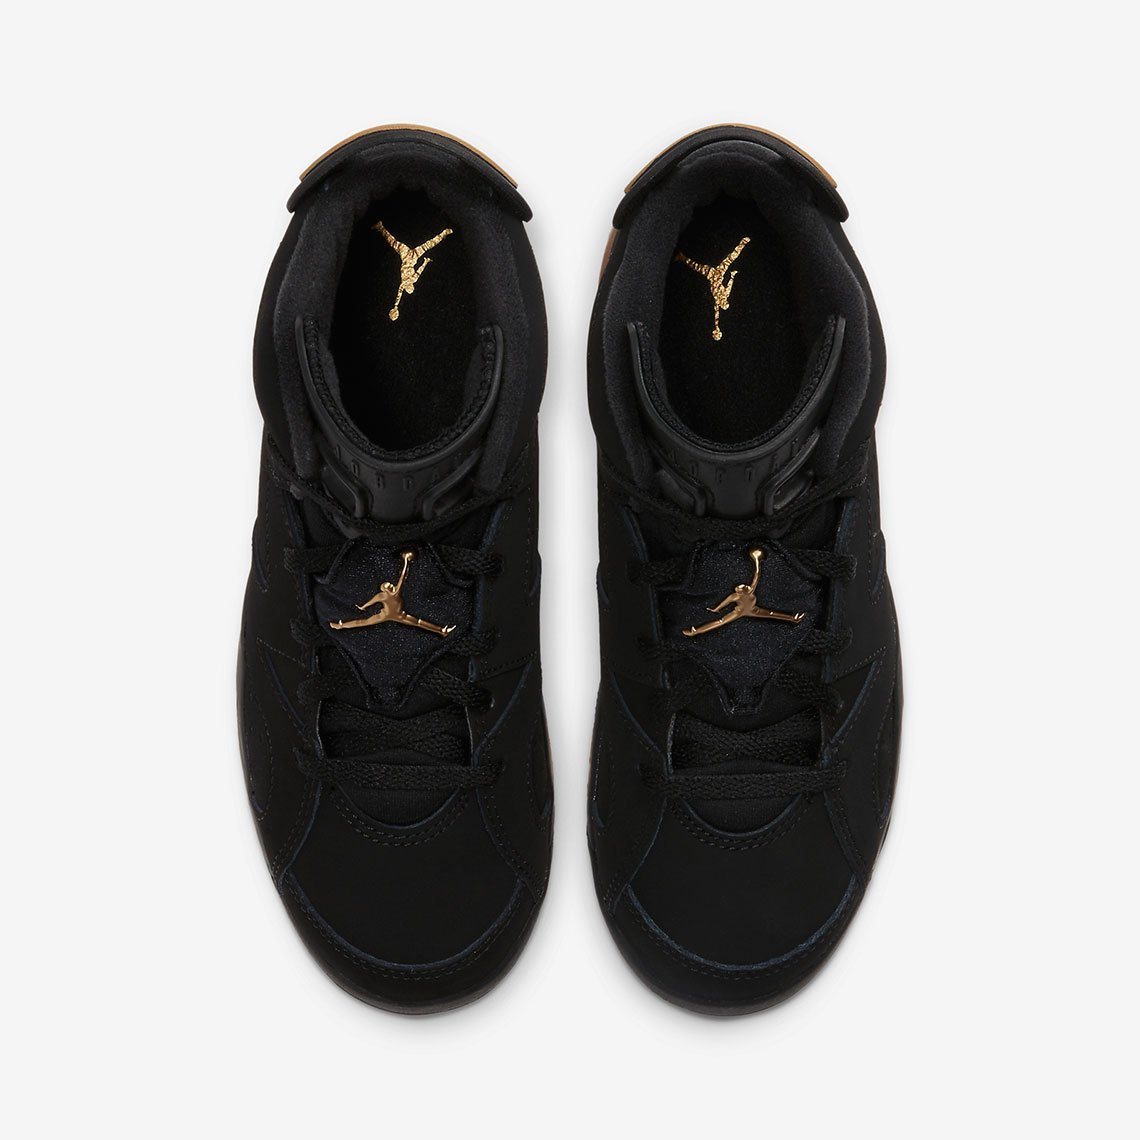 The Jordan brand has remixed one of the most iconic J colourways with this recently surfaced Dmp Pre School Ct4965 007 4